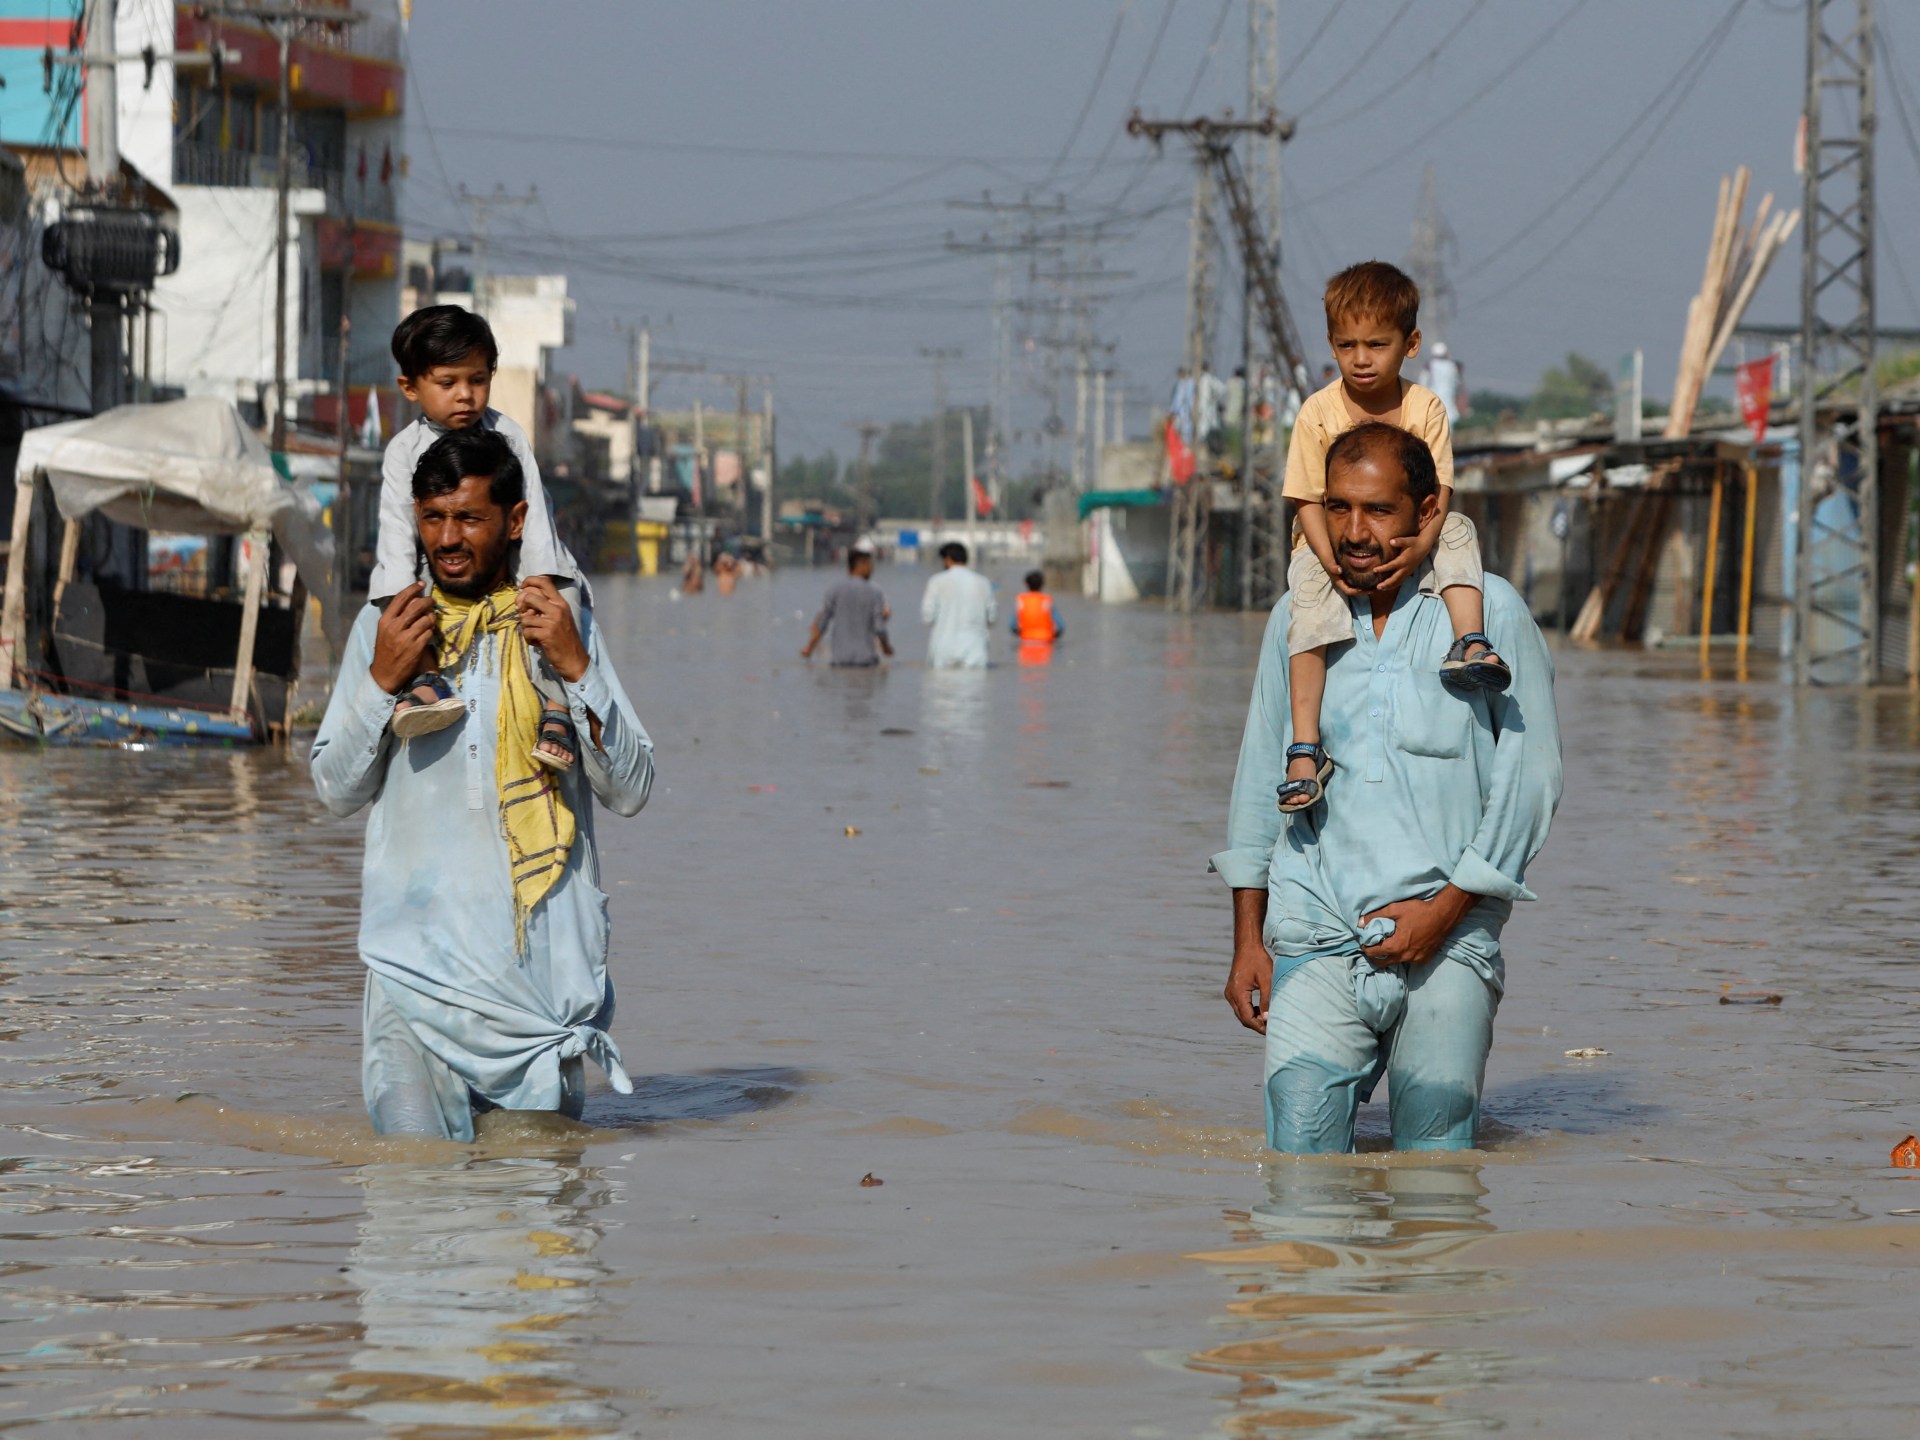 What makes South Asia so vulnerable to climate change?